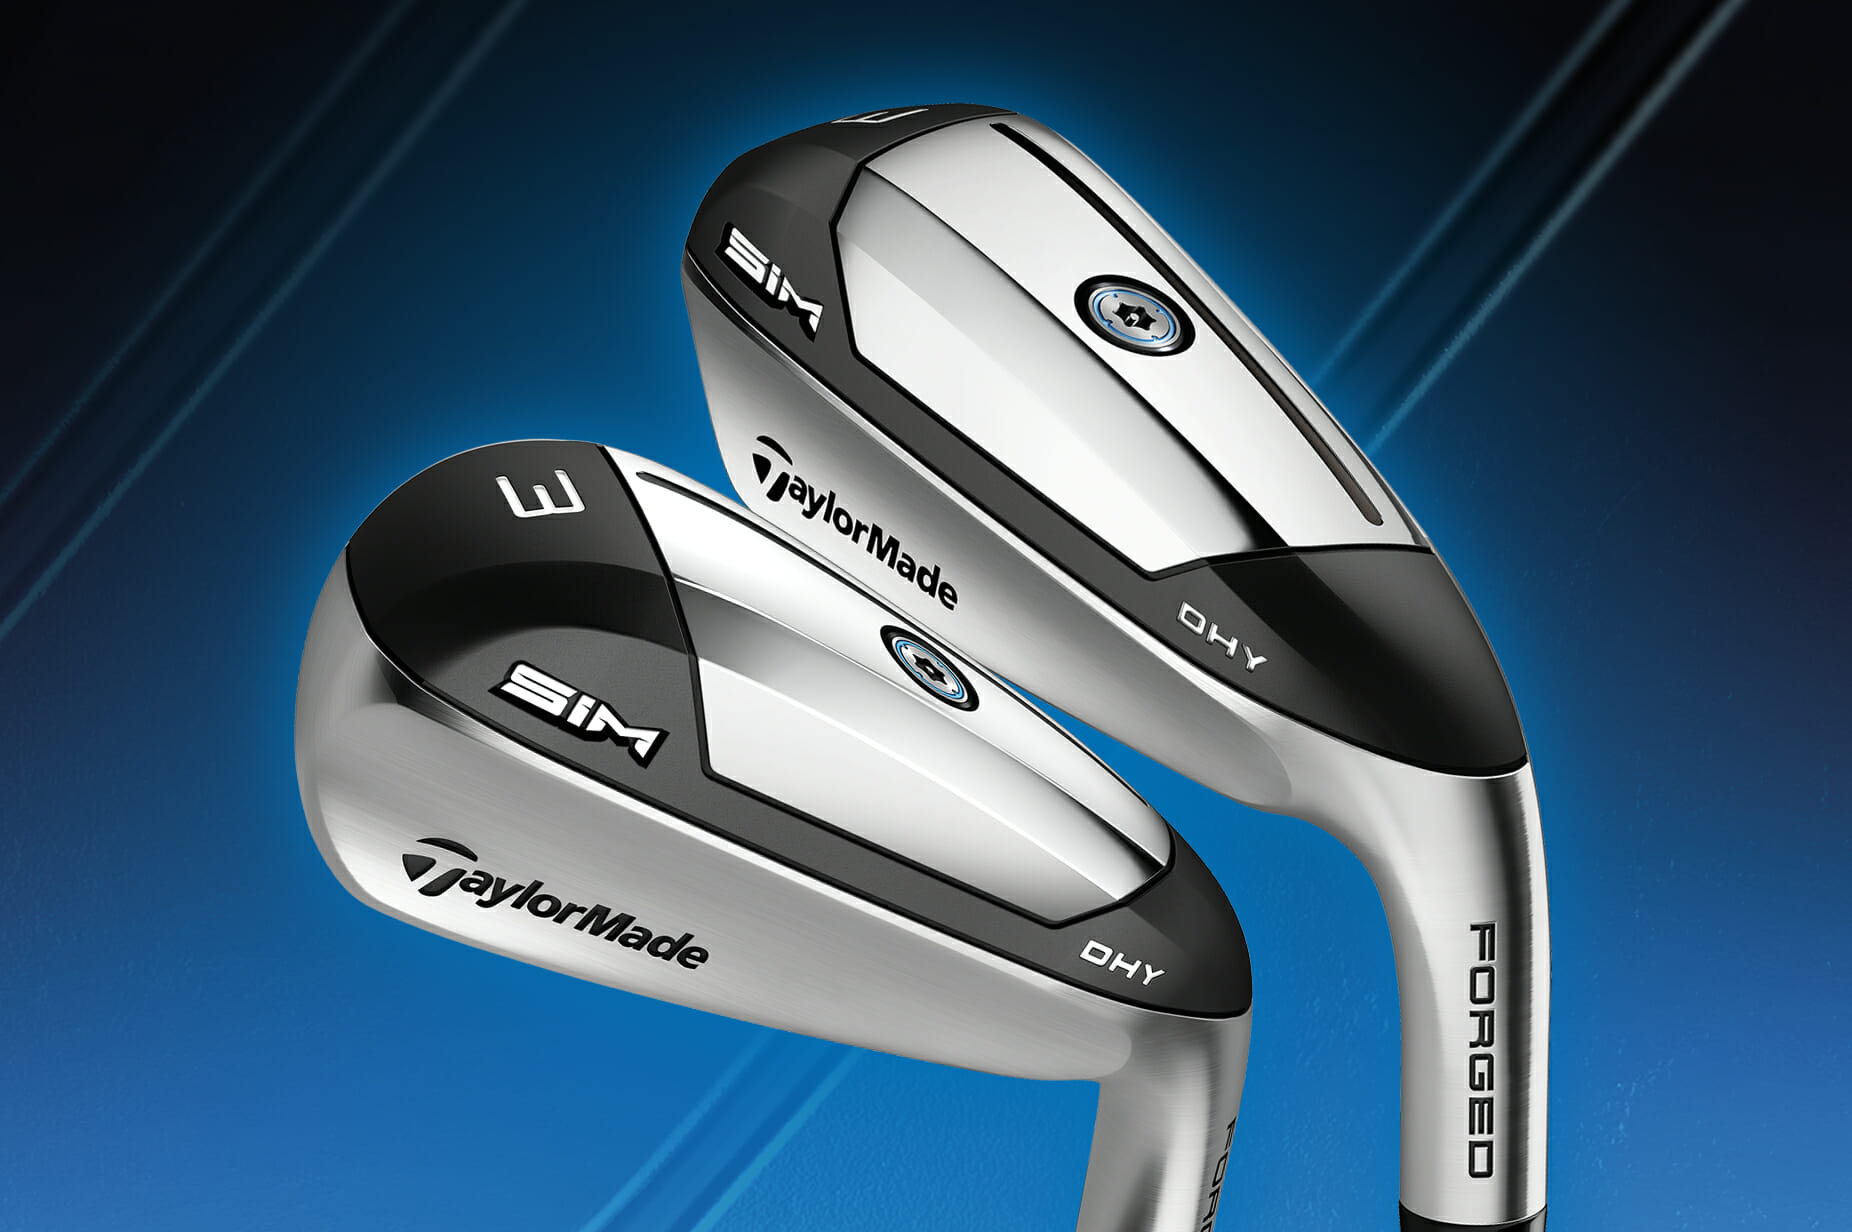 Versatility comes easy with TaylorMade’s new utility irons